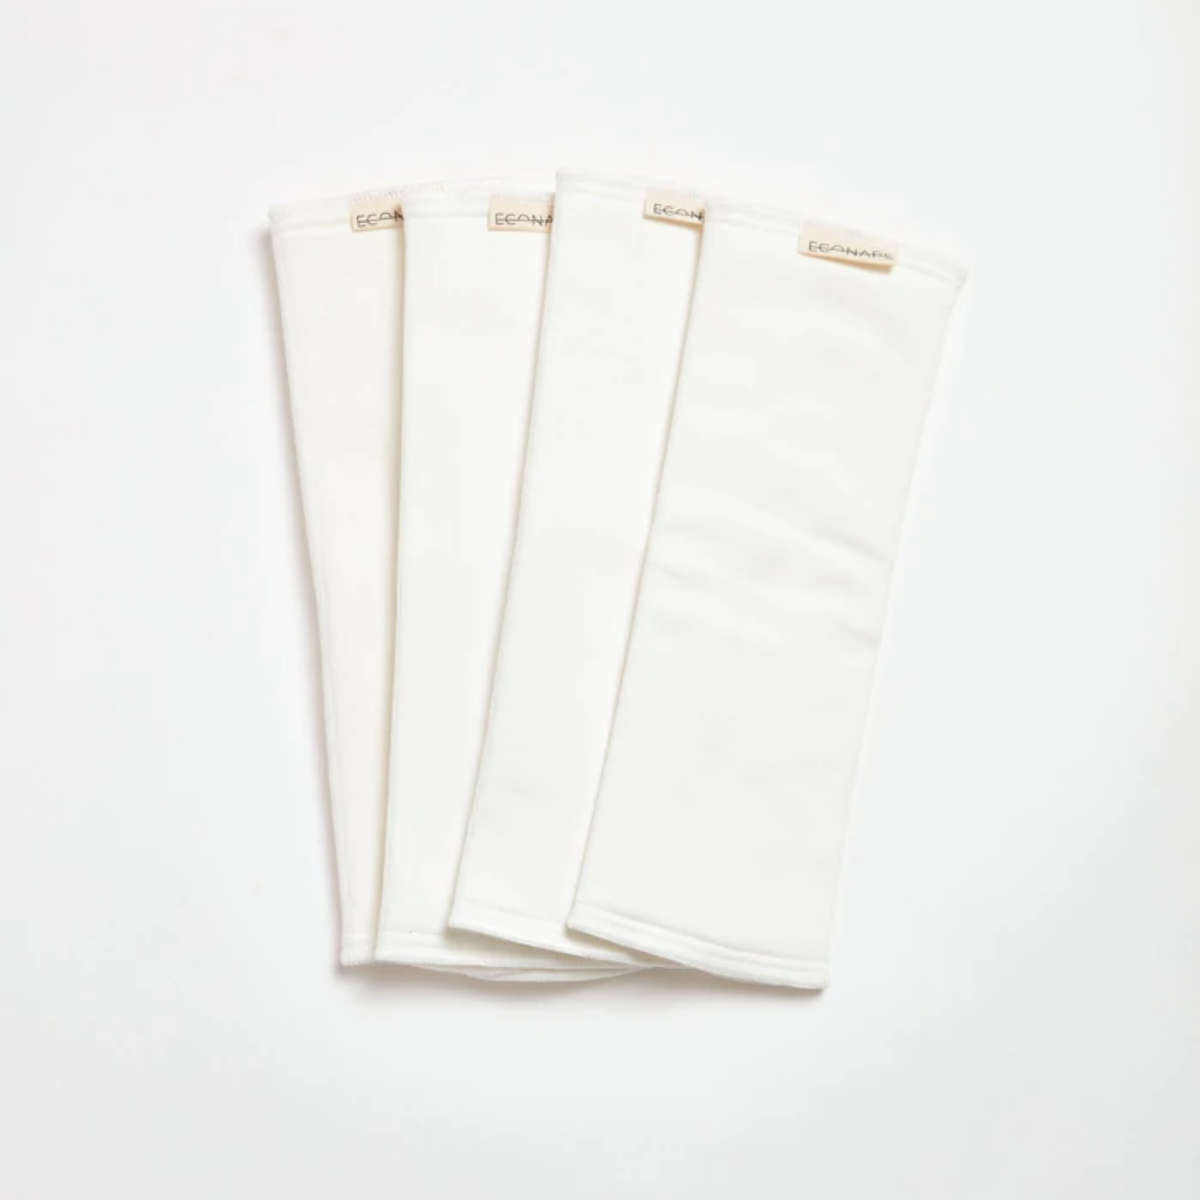 Four EcoNaps Bamboo Tri-Fold Night Booster Kits displayed on a white surface.